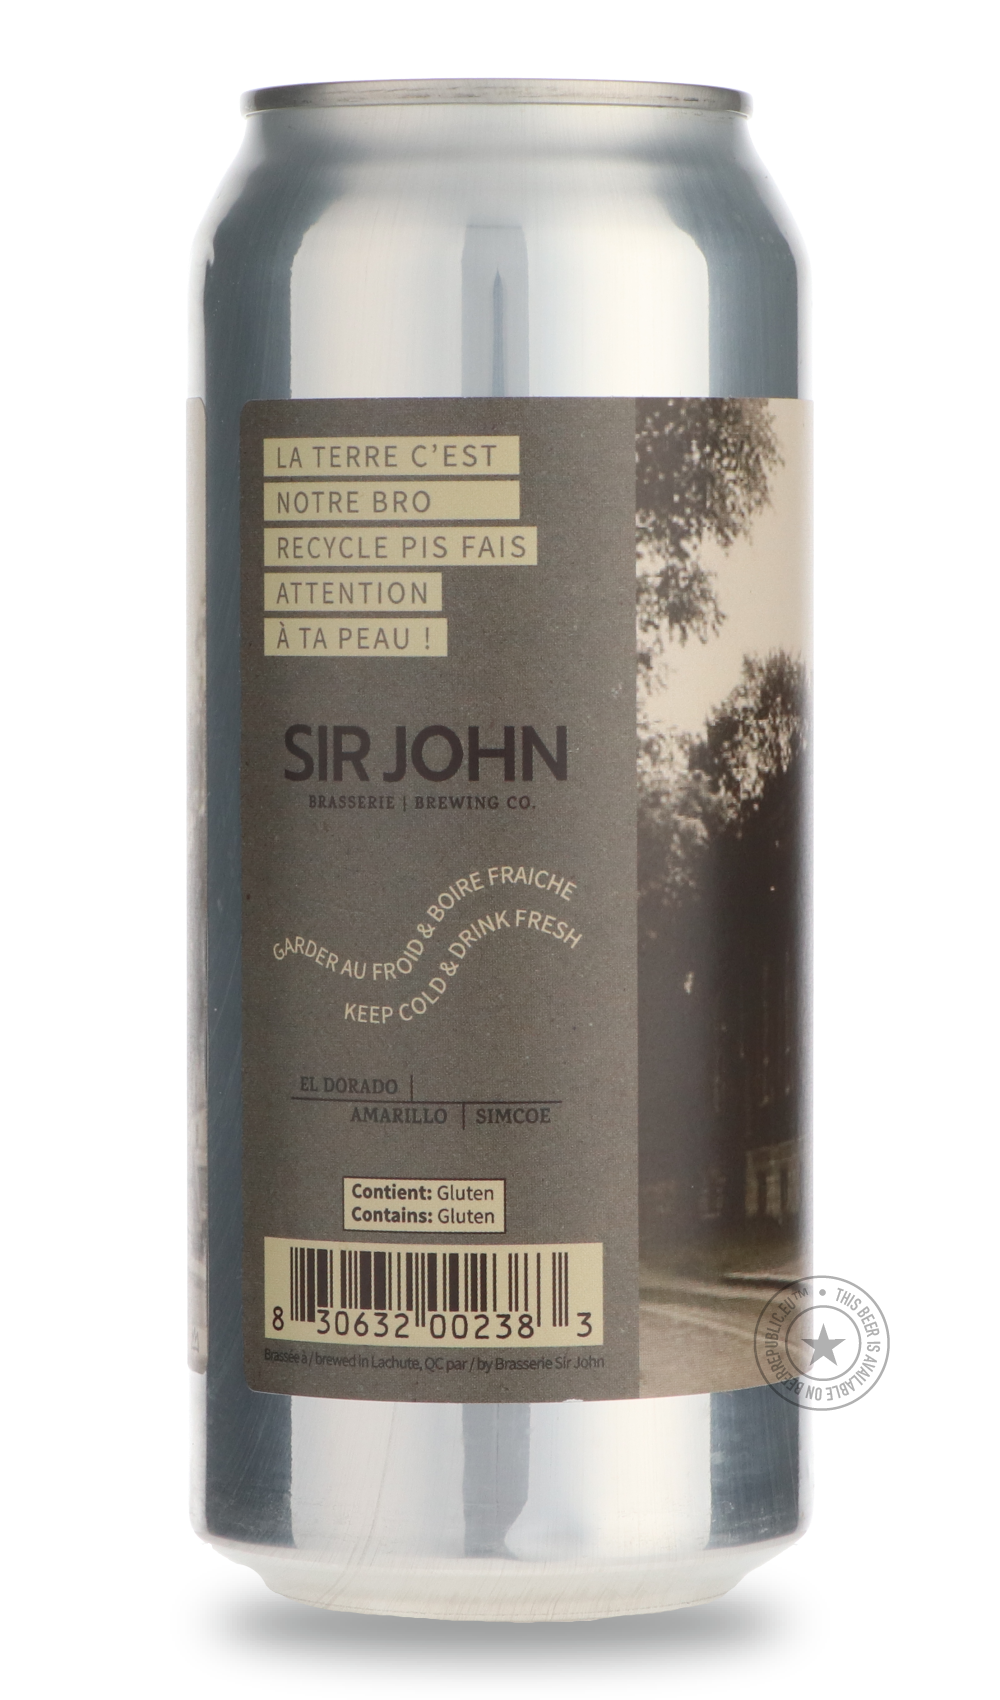 -Sir John- Auditorium-Stout & Porter- Only @ Beer Republic - The best online beer store for American & Canadian craft beer - Buy beer online from the USA and Canada - Bier online kopen - Amerikaans bier kopen - Craft beer store - Craft beer kopen - Amerikanisch bier kaufen - Bier online kaufen - Acheter biere online - IPA - Stout - Porter - New England IPA - Hazy IPA - Imperial Stout - Barrel Aged - Barrel Aged Imperial Stout - Brown - Dark beer - Blond - Blonde - Pilsner - Lager - Wheat - Weizen - Amber - 